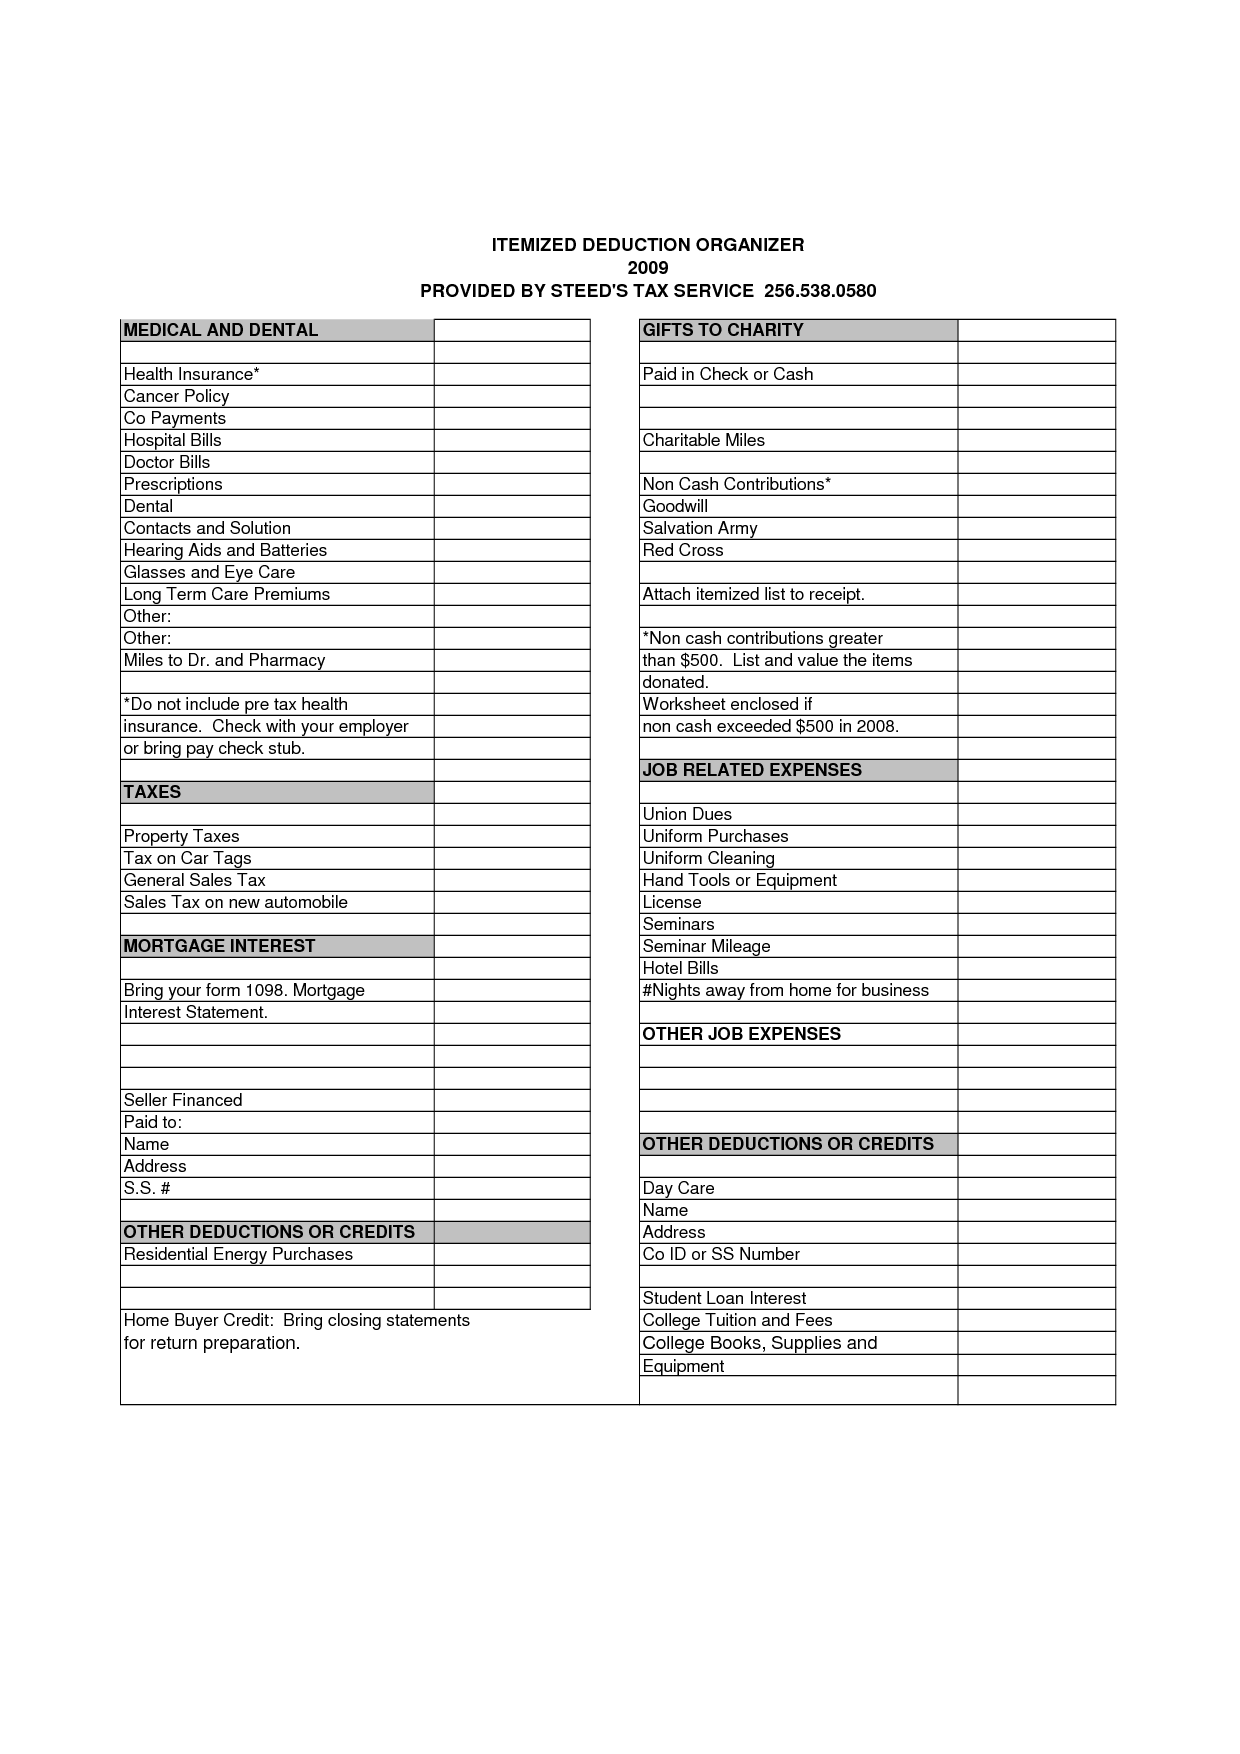 8-best-images-of-tax-itemized-deduction-worksheet-irs-form-1040